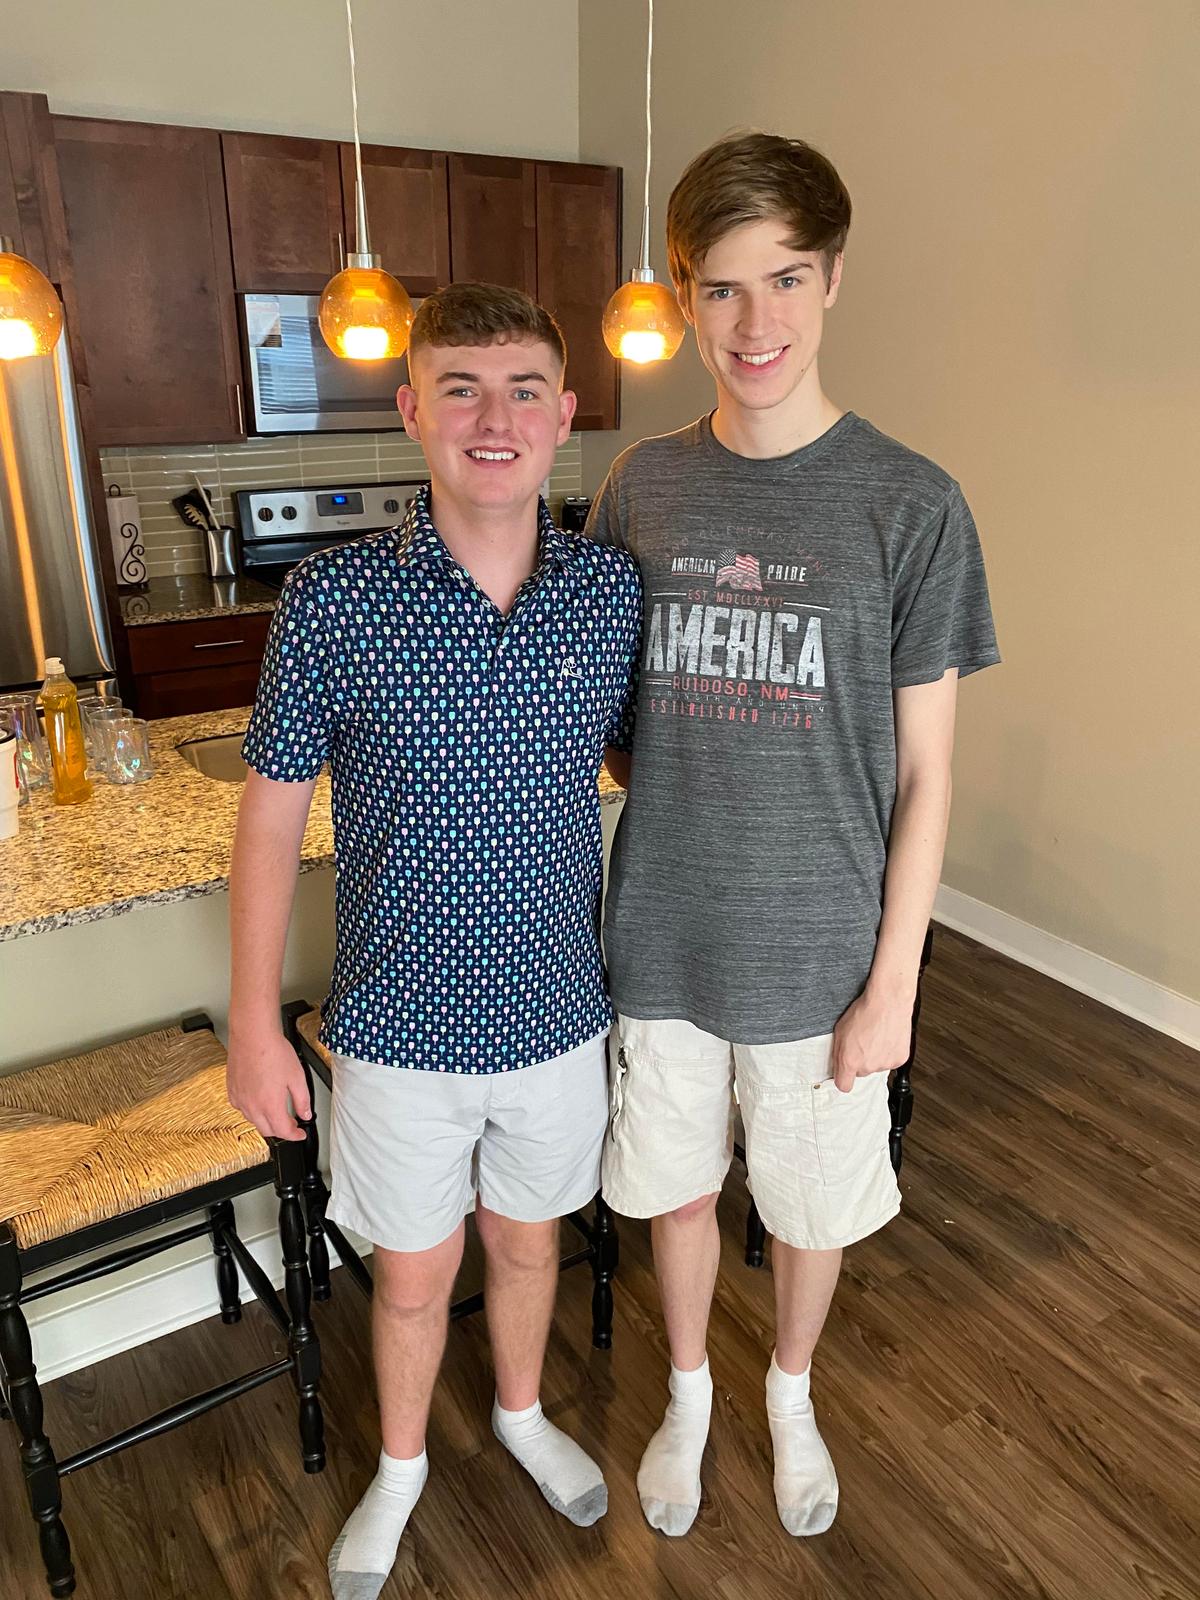 Tate (L) and Seth are now college roommates. (Courtesy of Cheri Hamilton Lewis)